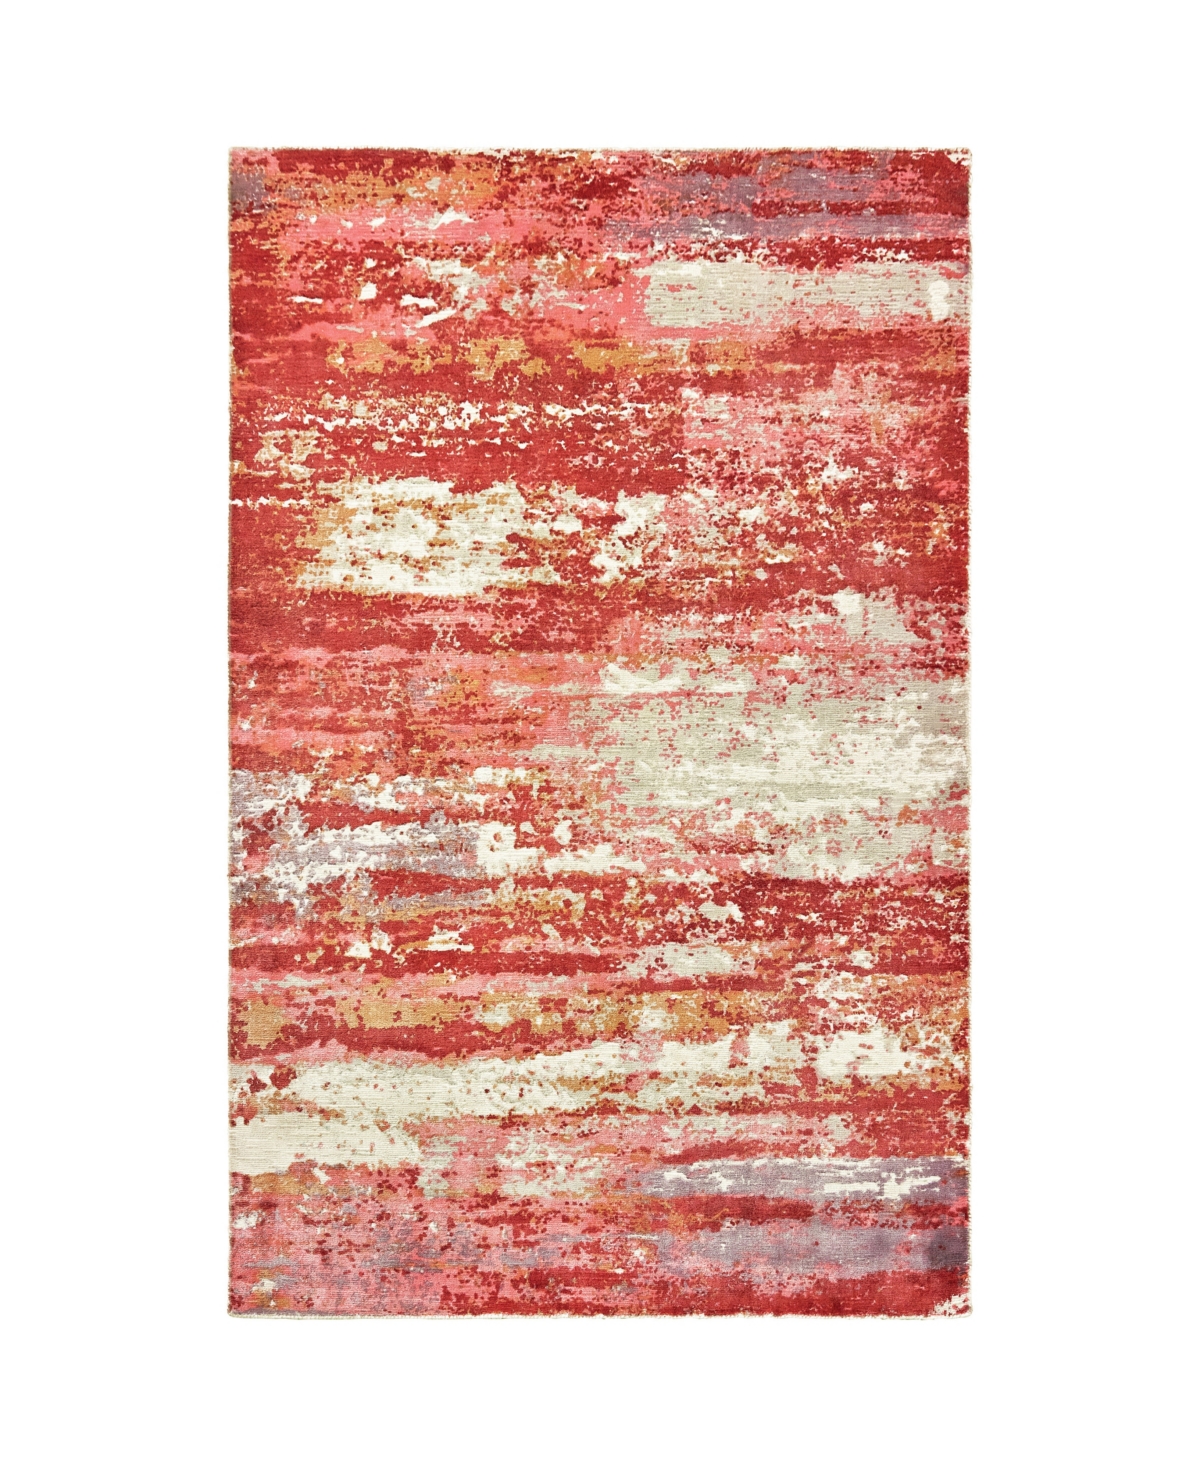 Jhb Design Creation CRE04 Pink 10' x 14' Area Rug - Red